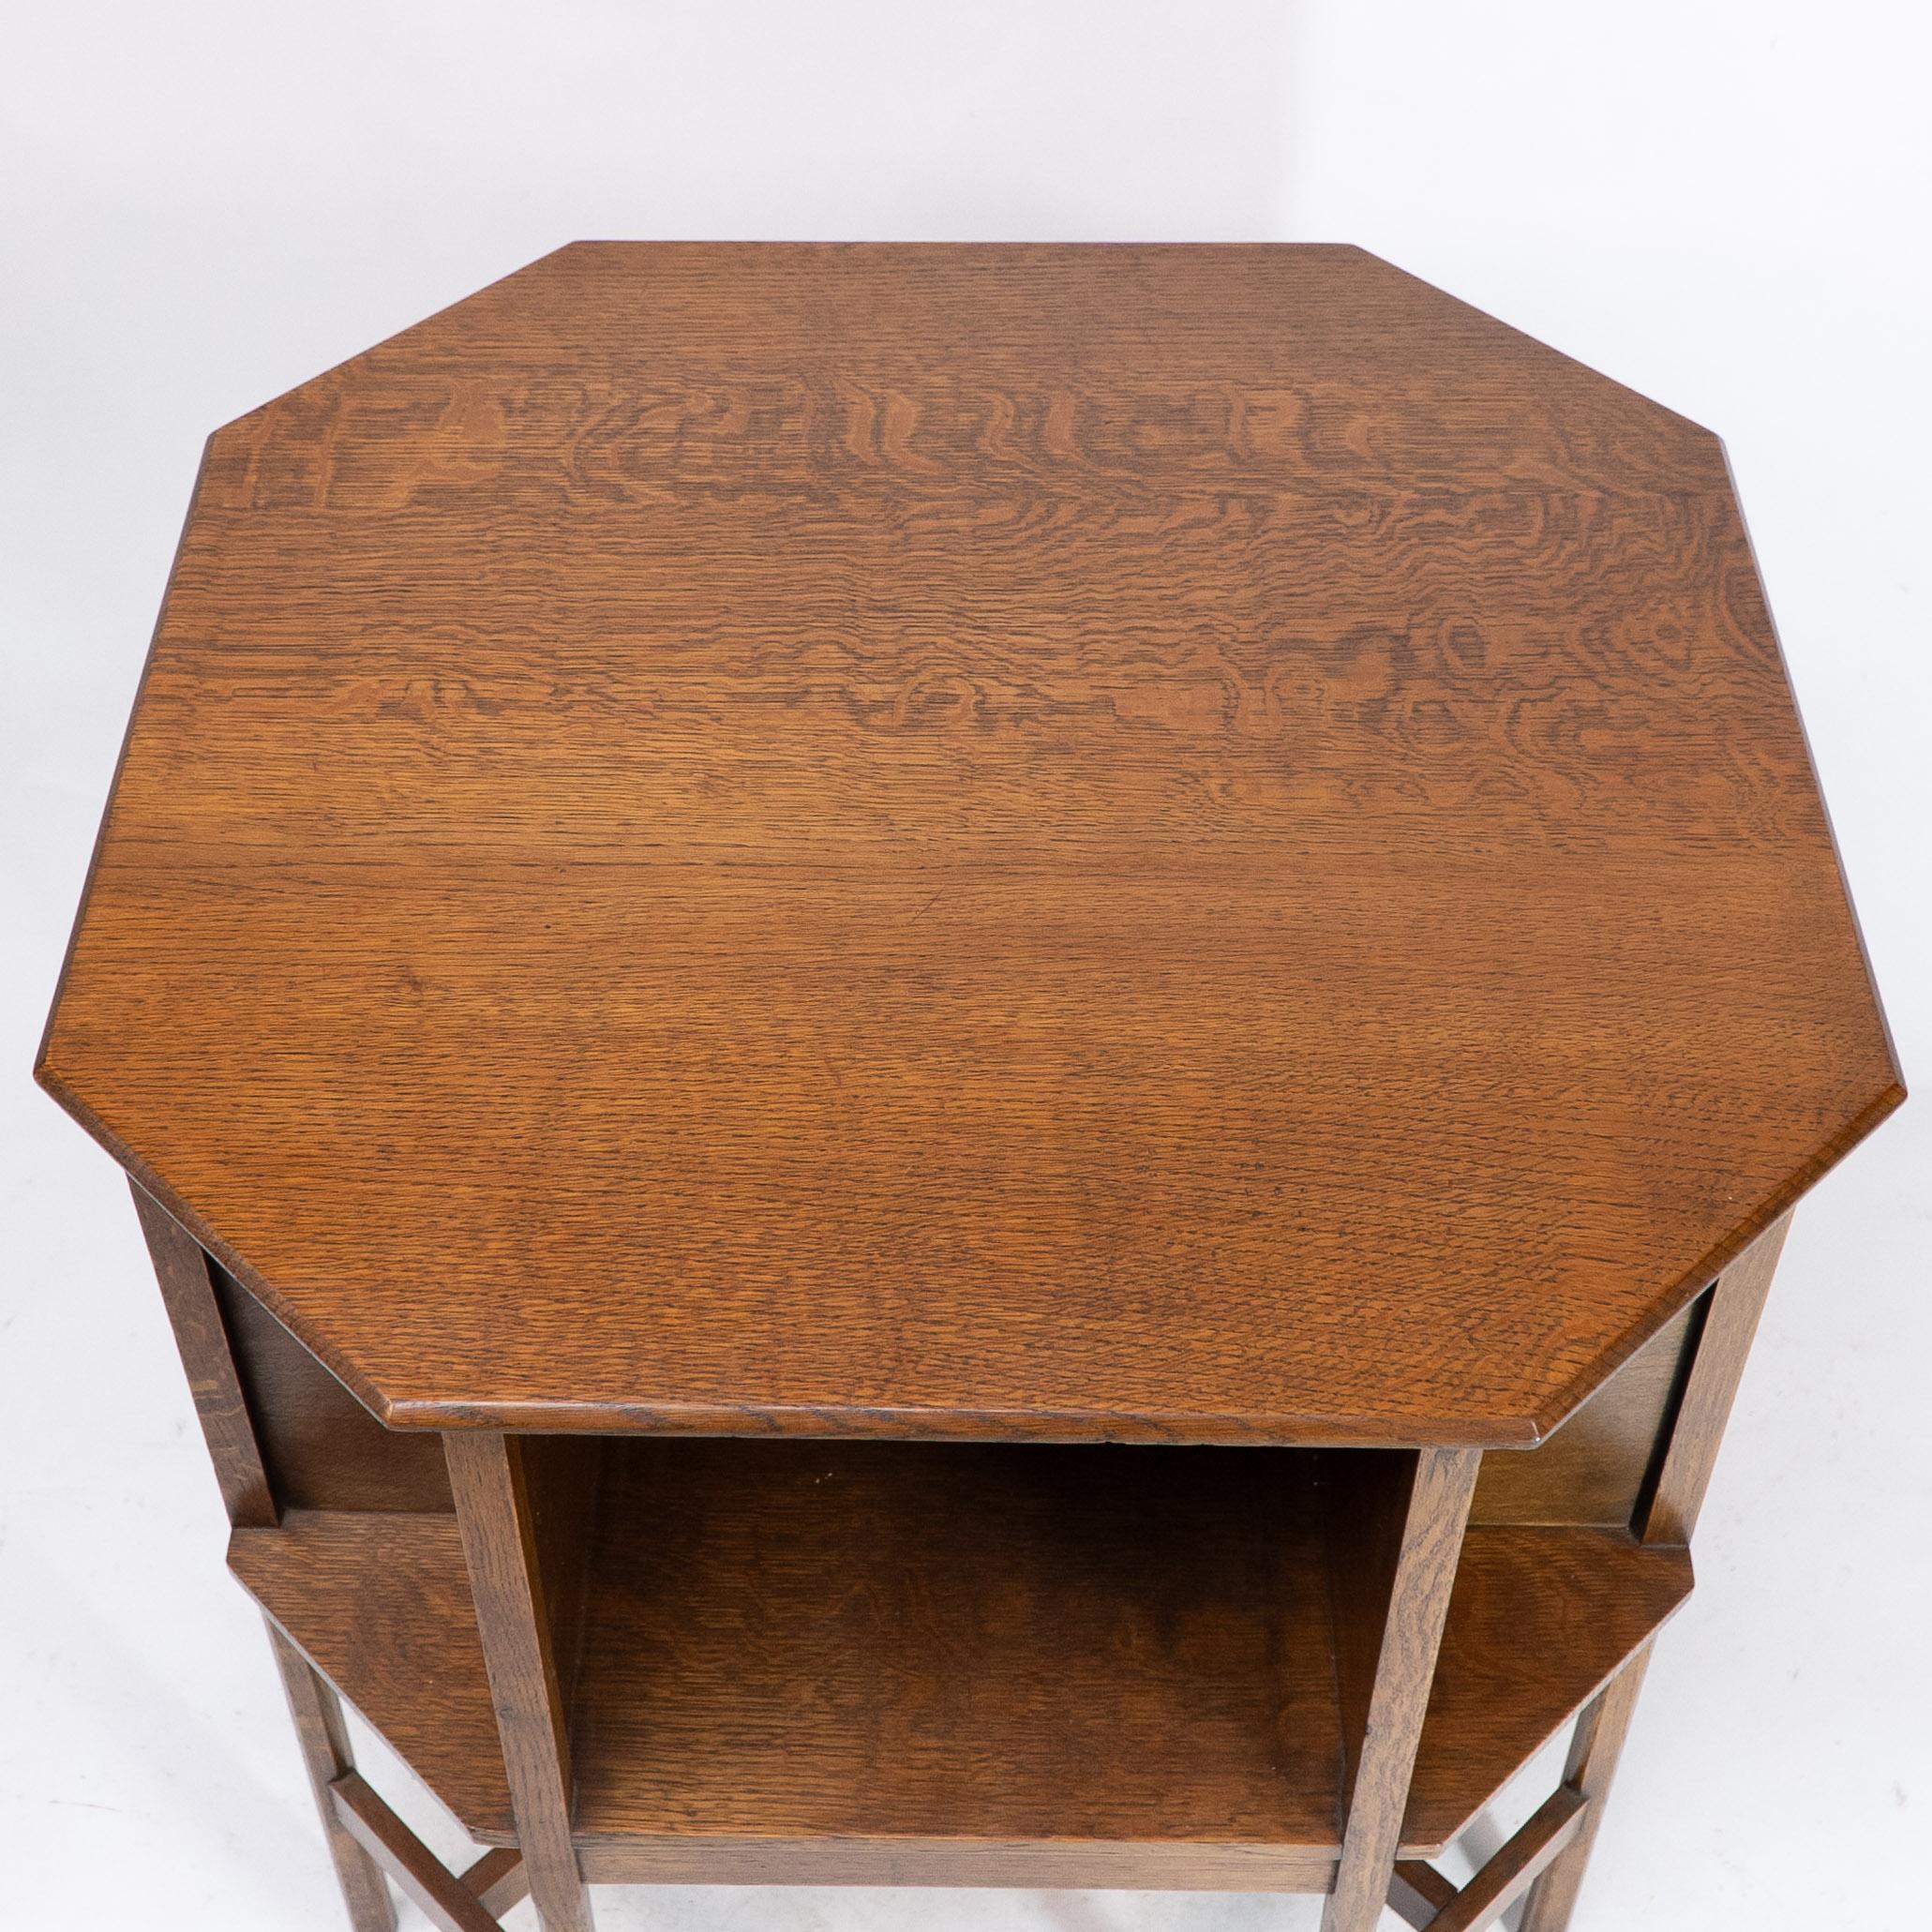 Ambrose Heals Attri, An Arts & Crafts Oak Octagonal Book Table with Eight Legs For Sale 3